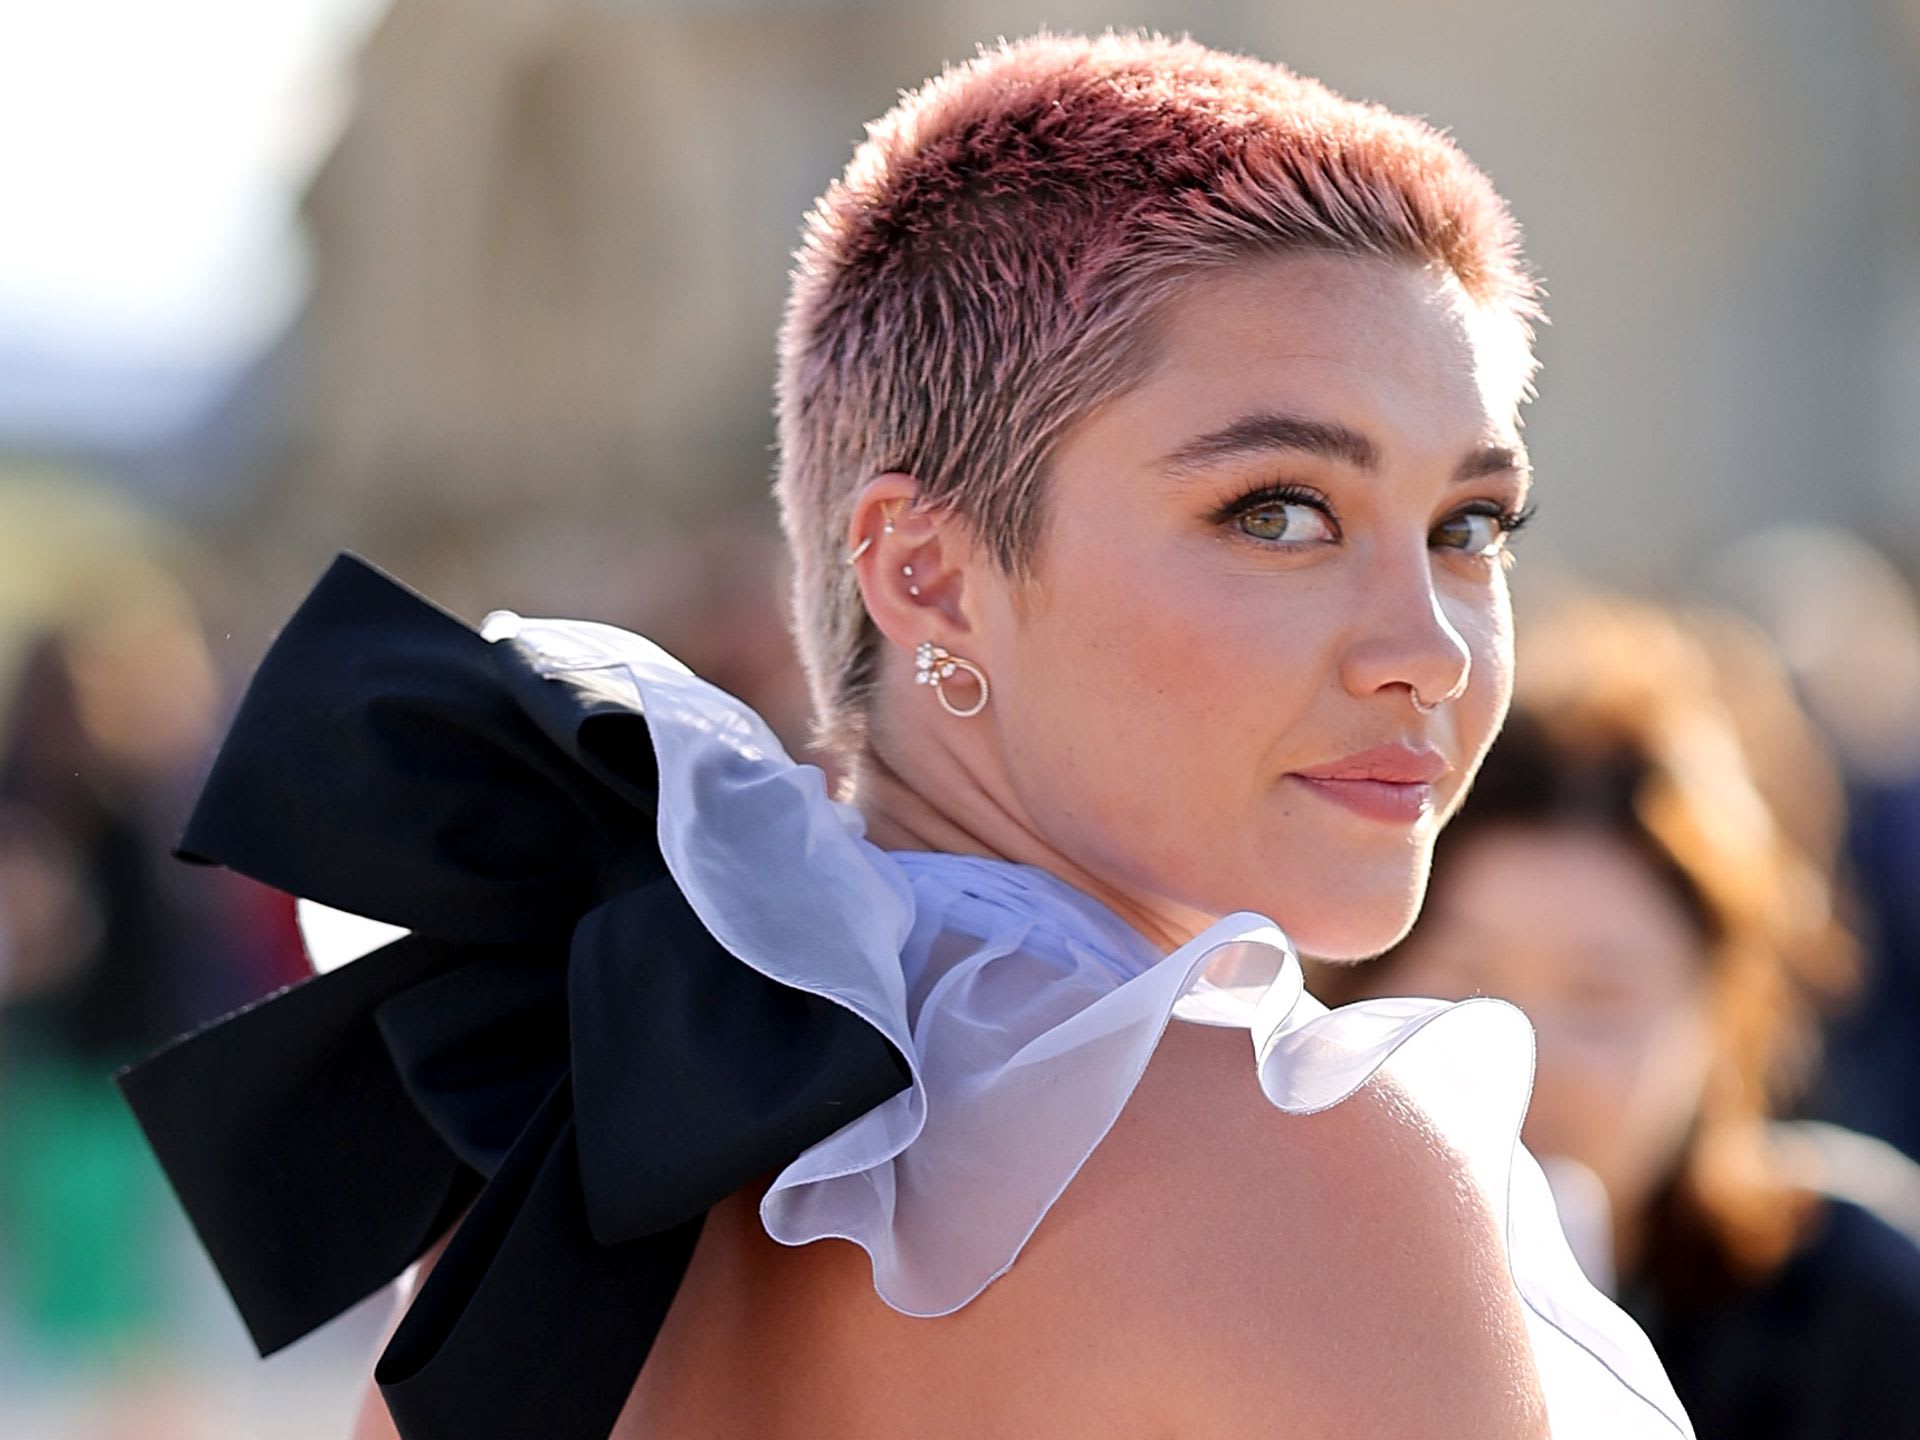 Paris Jackson with a pink buzz cut and a bow in her hair - Florence Pugh